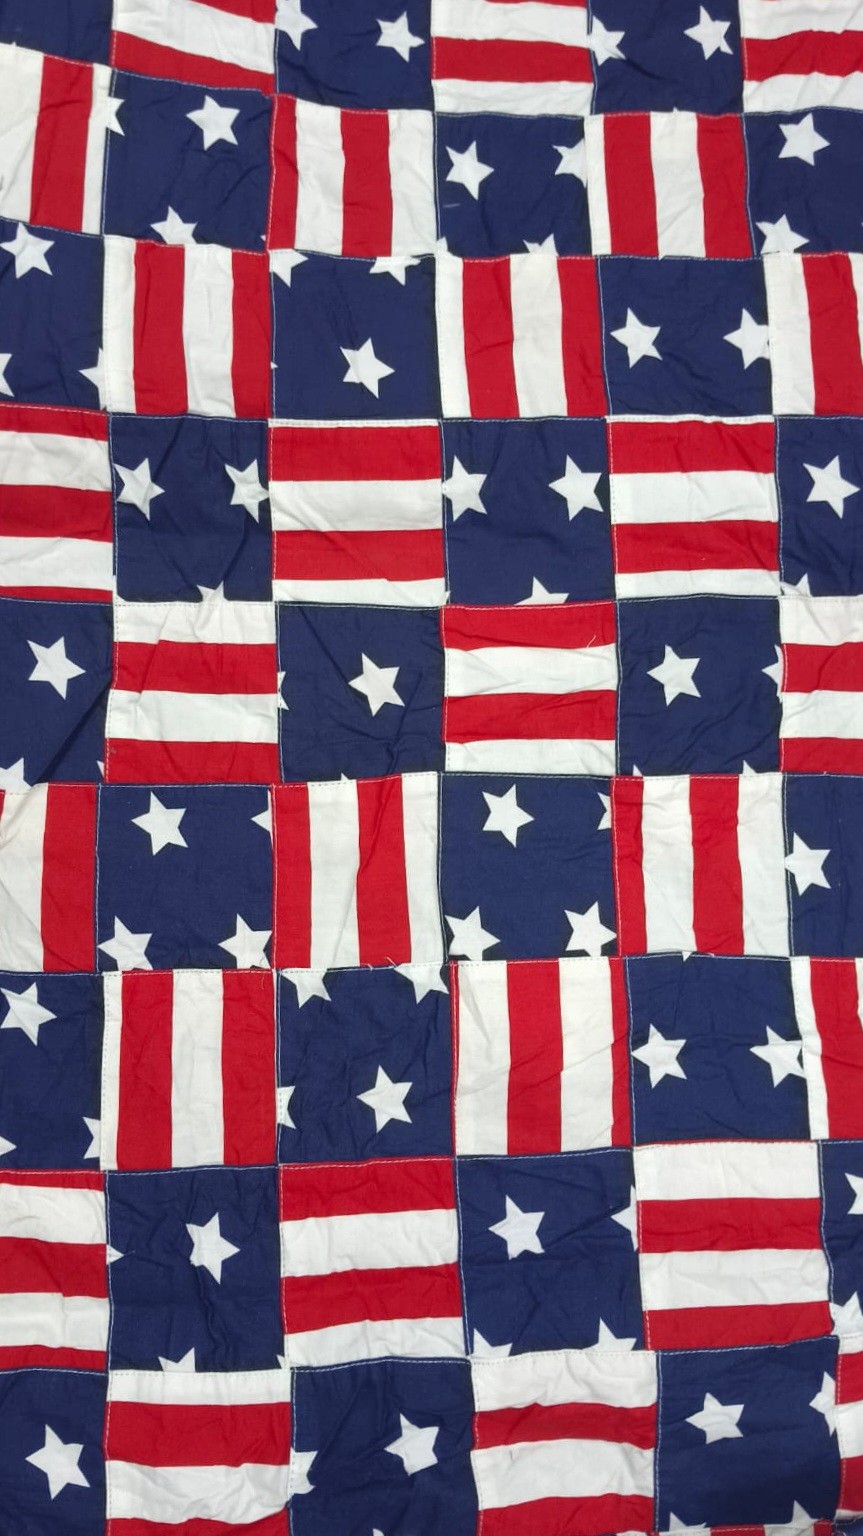 PatchPatchwork fabric with printed stars & stripes - American Flag fabric for children's clothing, shirts, skirts & dog bandanas.